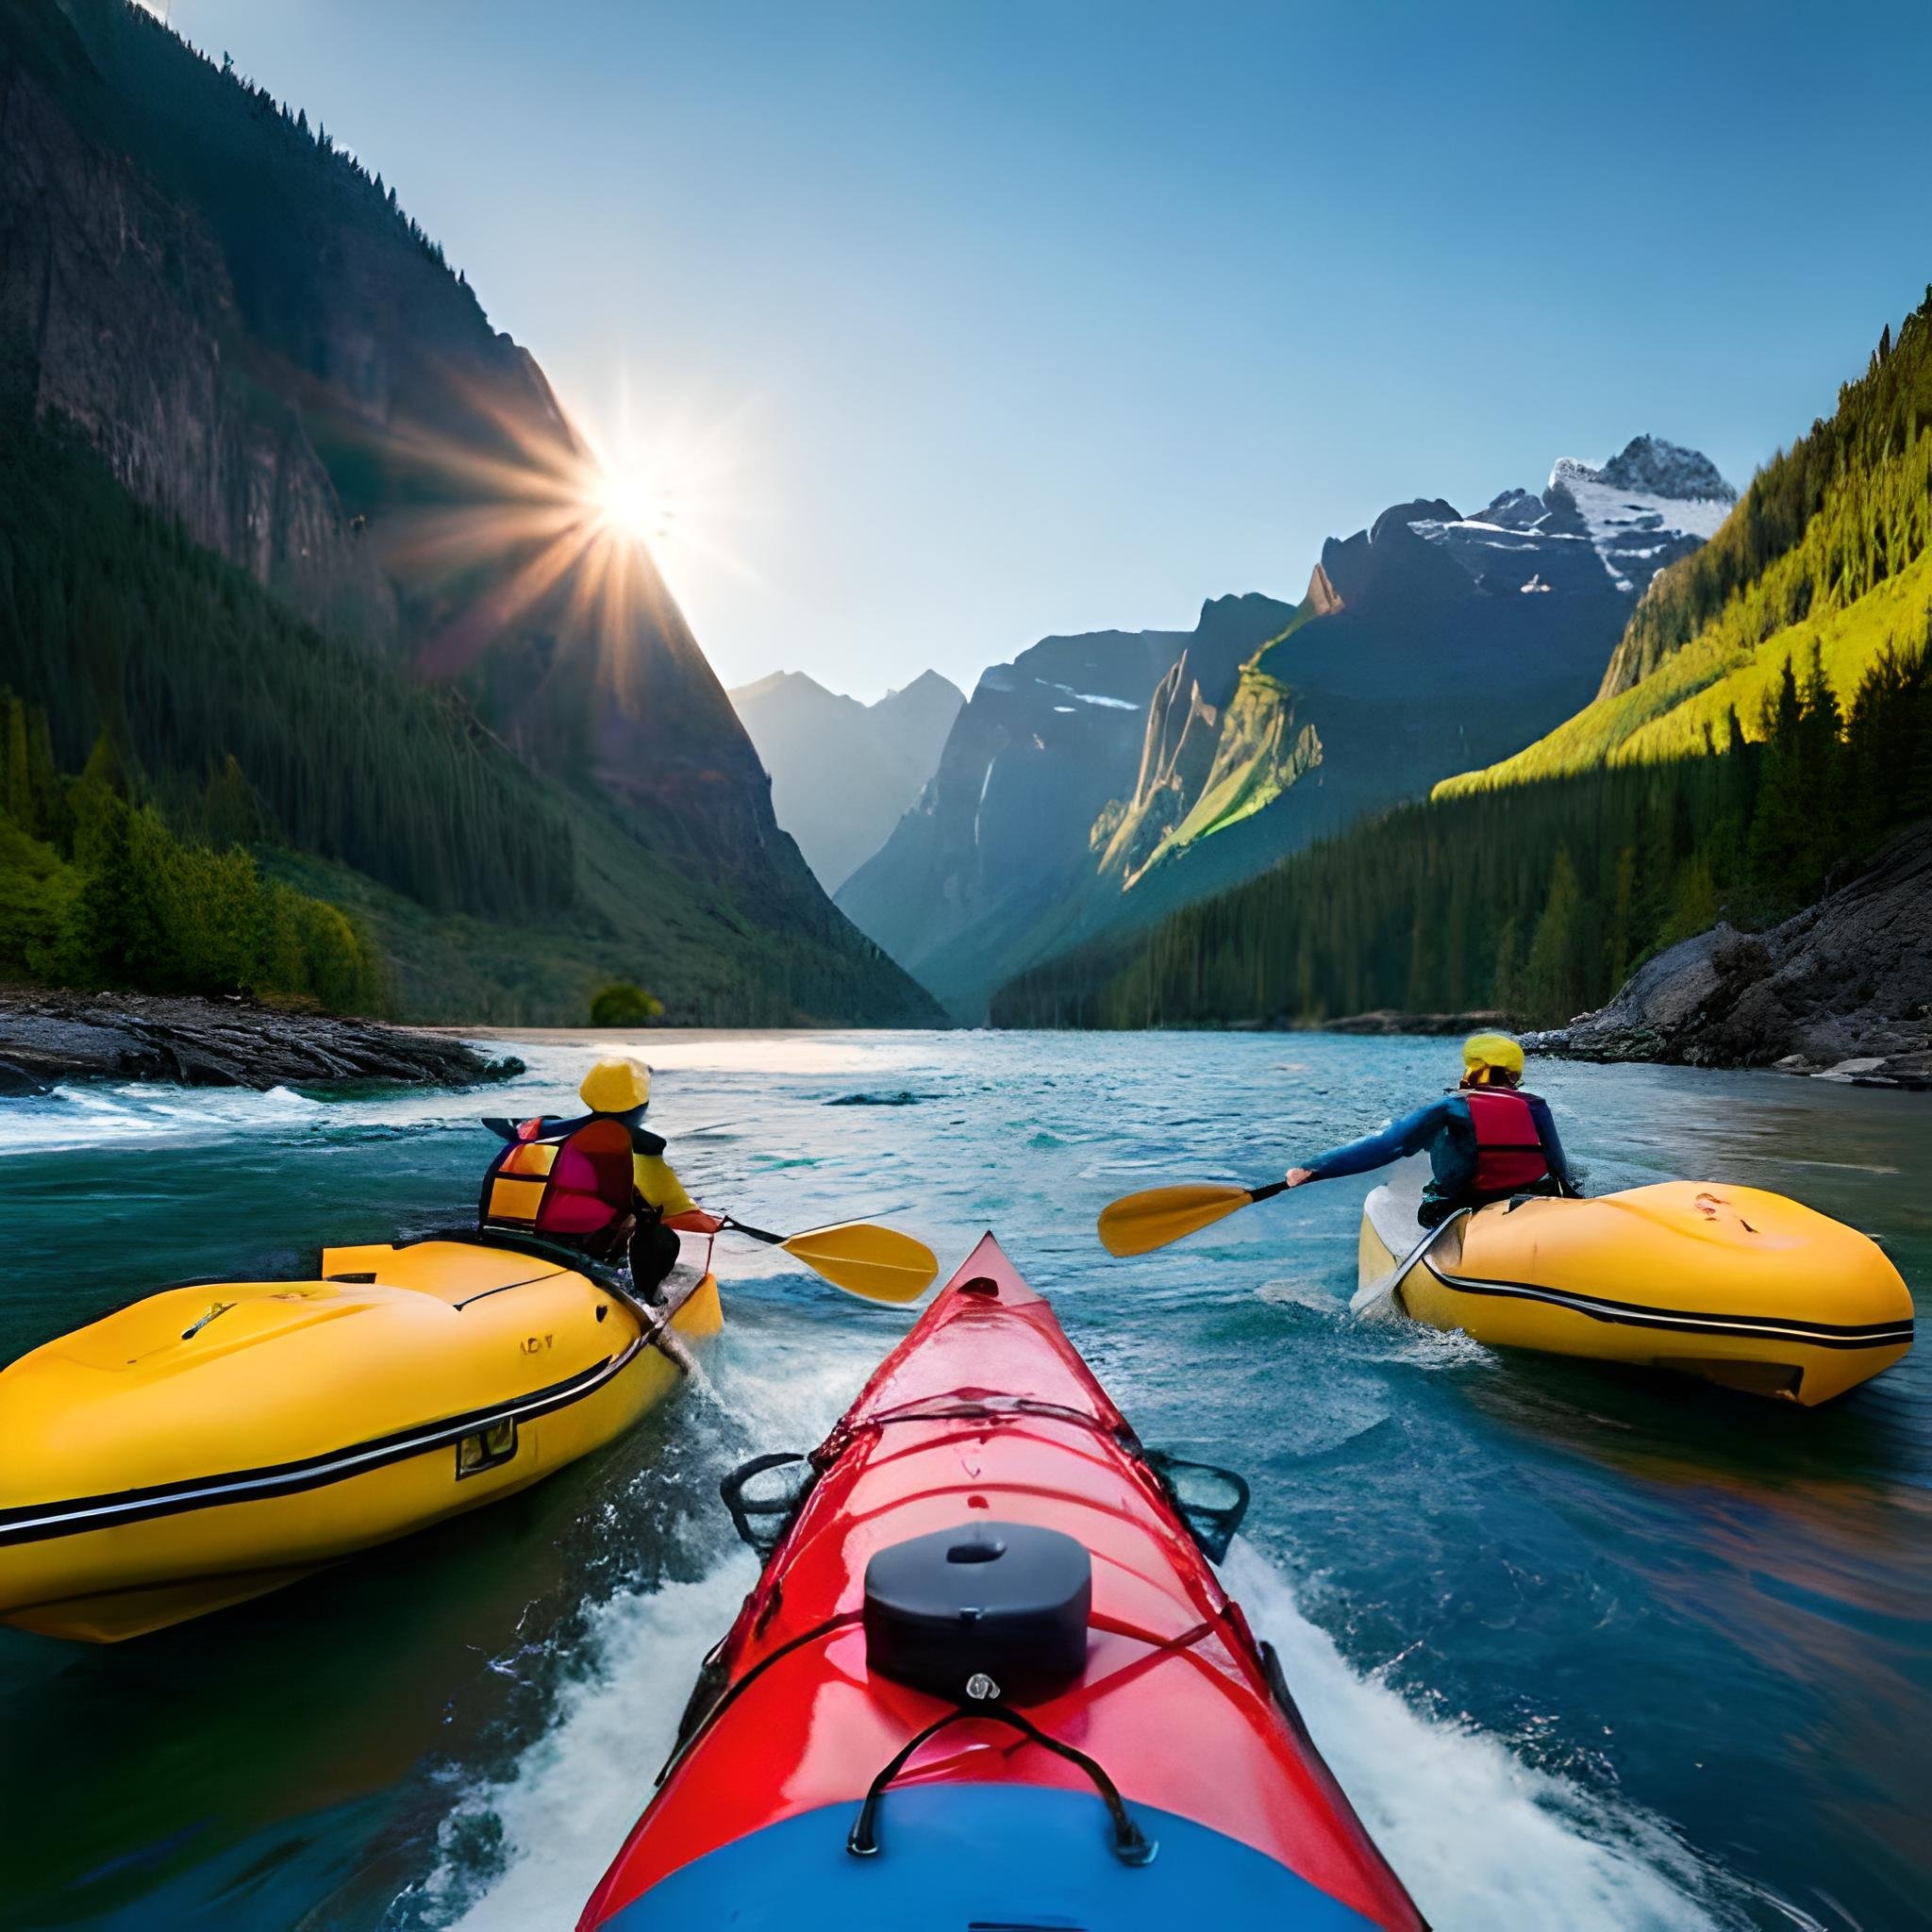 Feel the rush of adrenaline as you navigate powerful rapids and meandering rivers. These water-based adventures offer a thrilling combination of excitement and natural beauty even if it's rafting down the Grand Canyon in the United States or kayaking through the fjords of Norway.